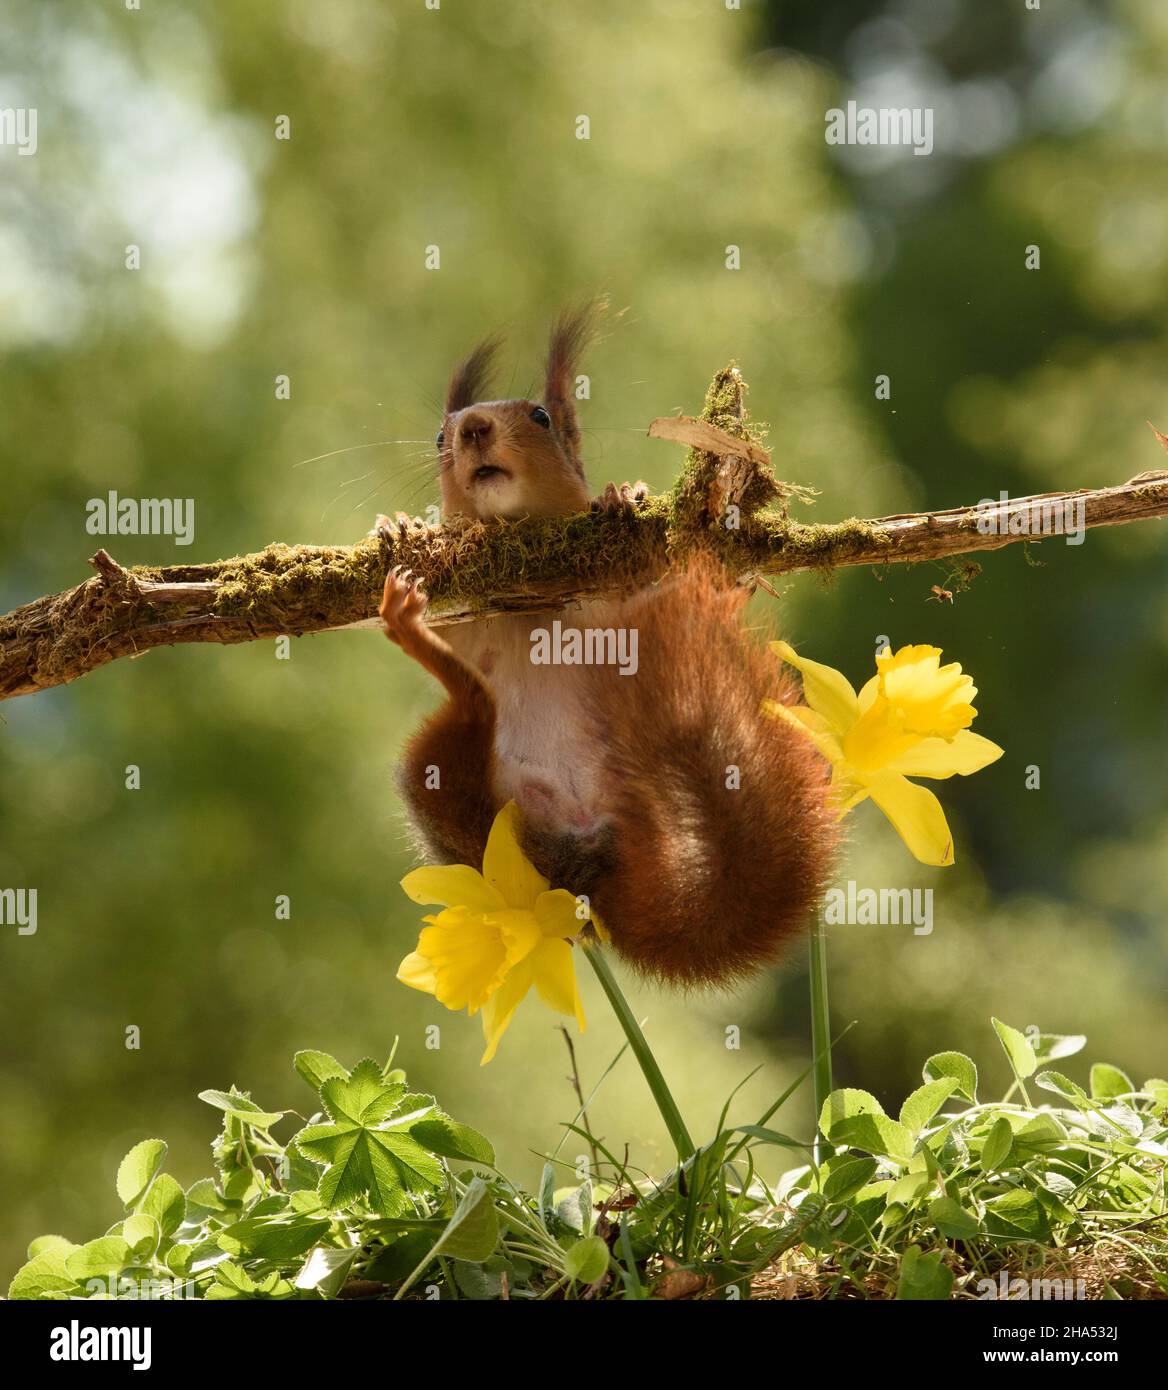 red squirrel is loosing balance on a branch with moss Stock Photo